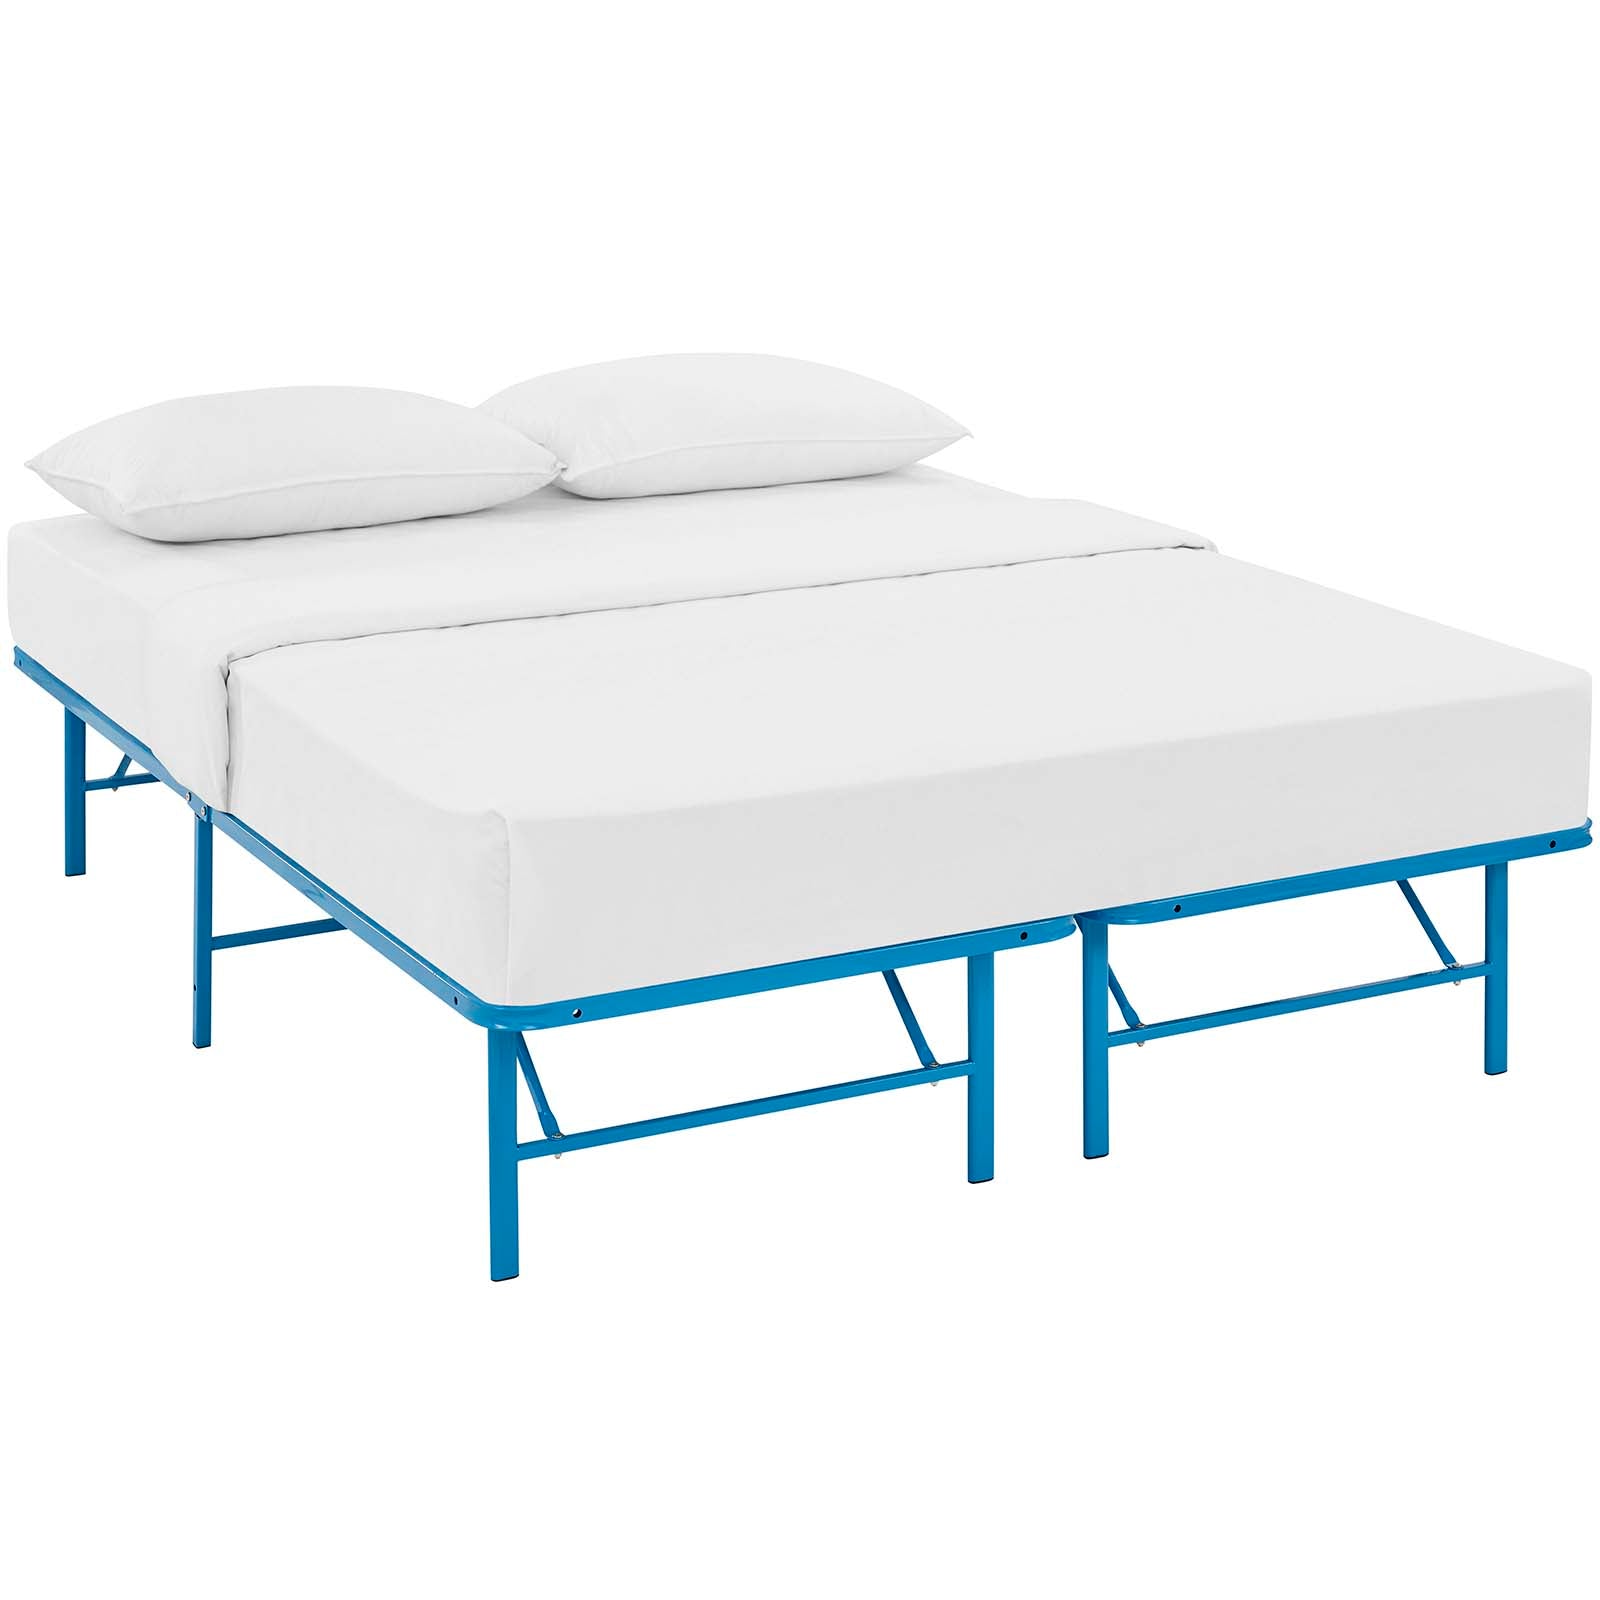 Modway Beds - Horizon Queen Stainless Steel Bed Frame Light Blue